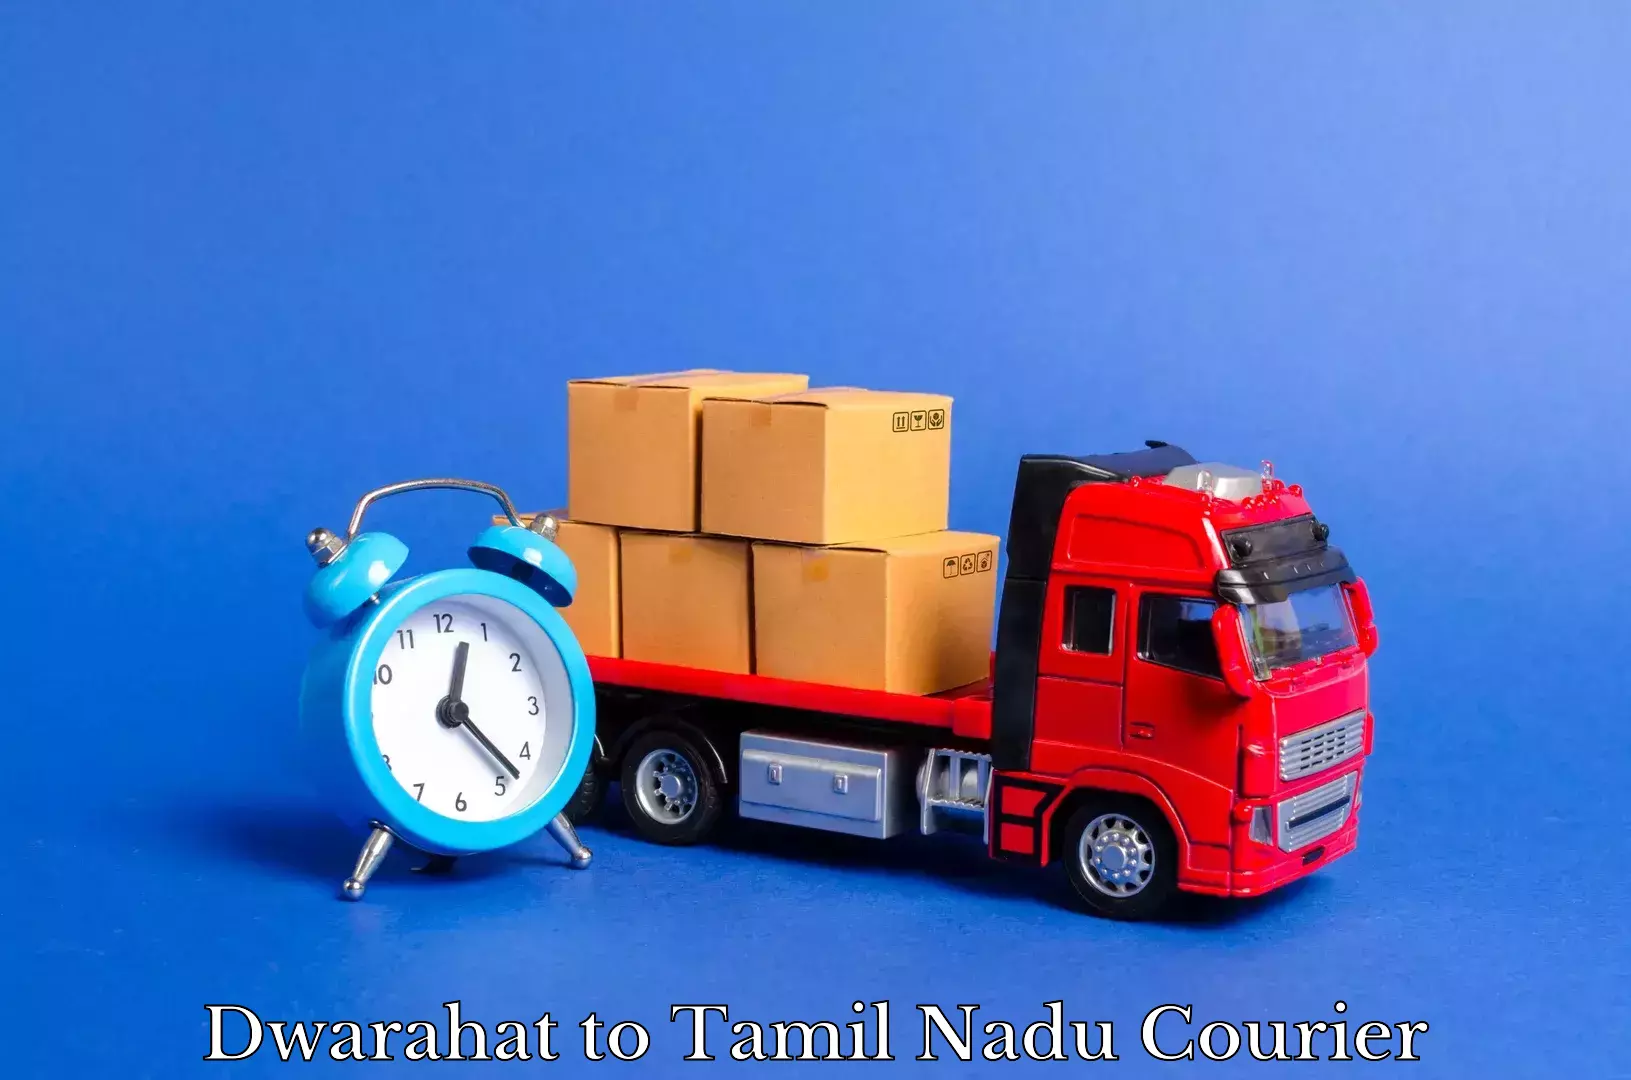 Reliable movers Dwarahat to Chennai Port